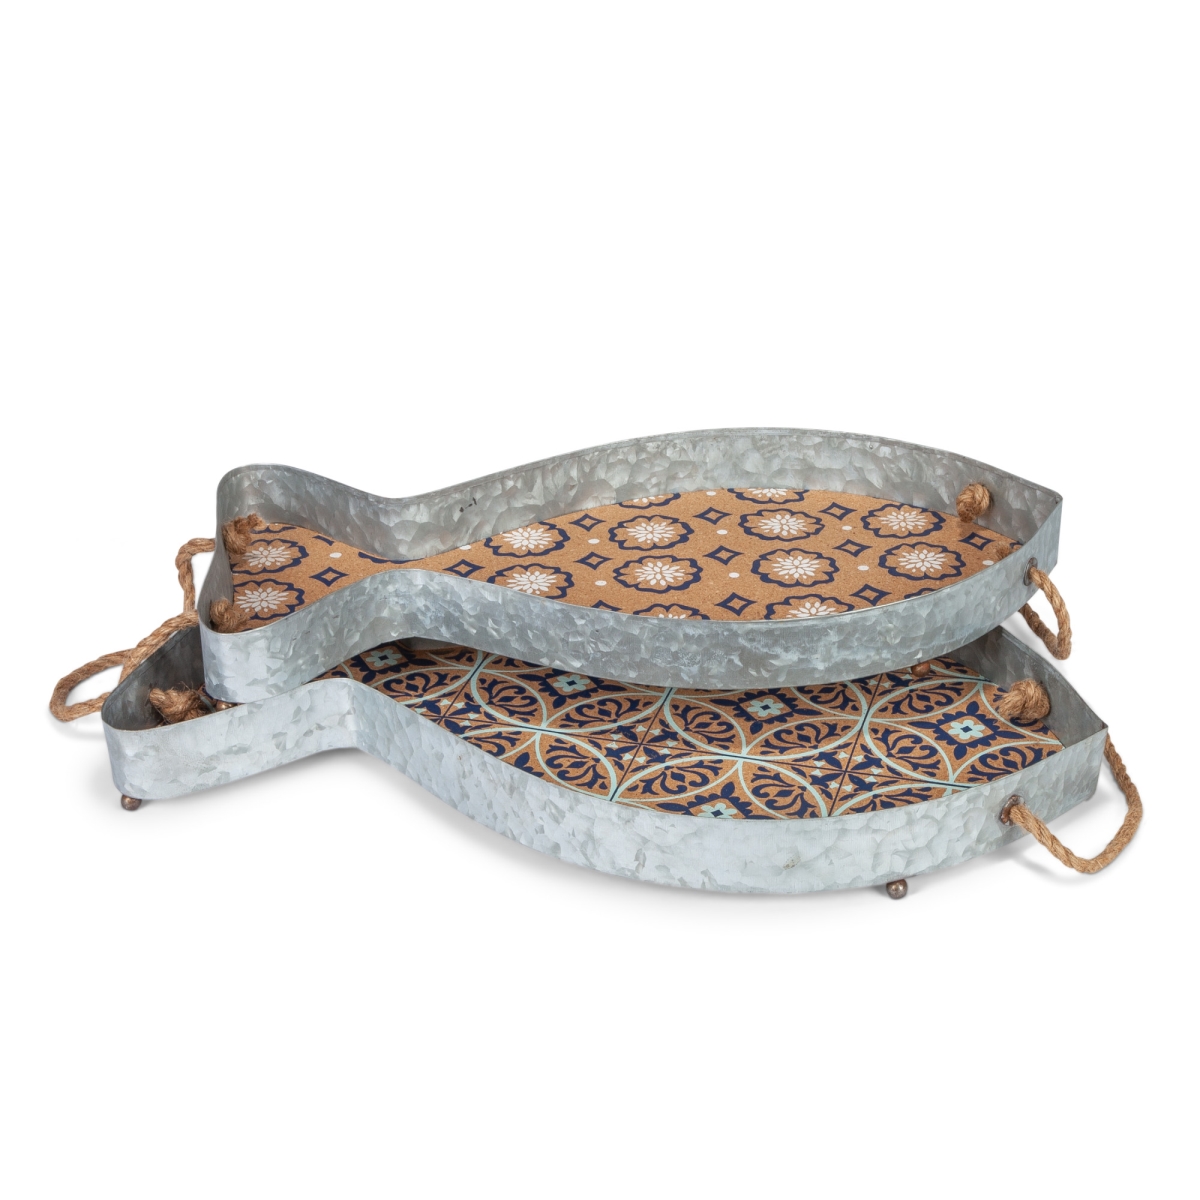 Gerson 94618ec Assorted-size Galvanized Fish Trays With Cork Printed Bases & Rope Handle - Multi Color - Set Of 2